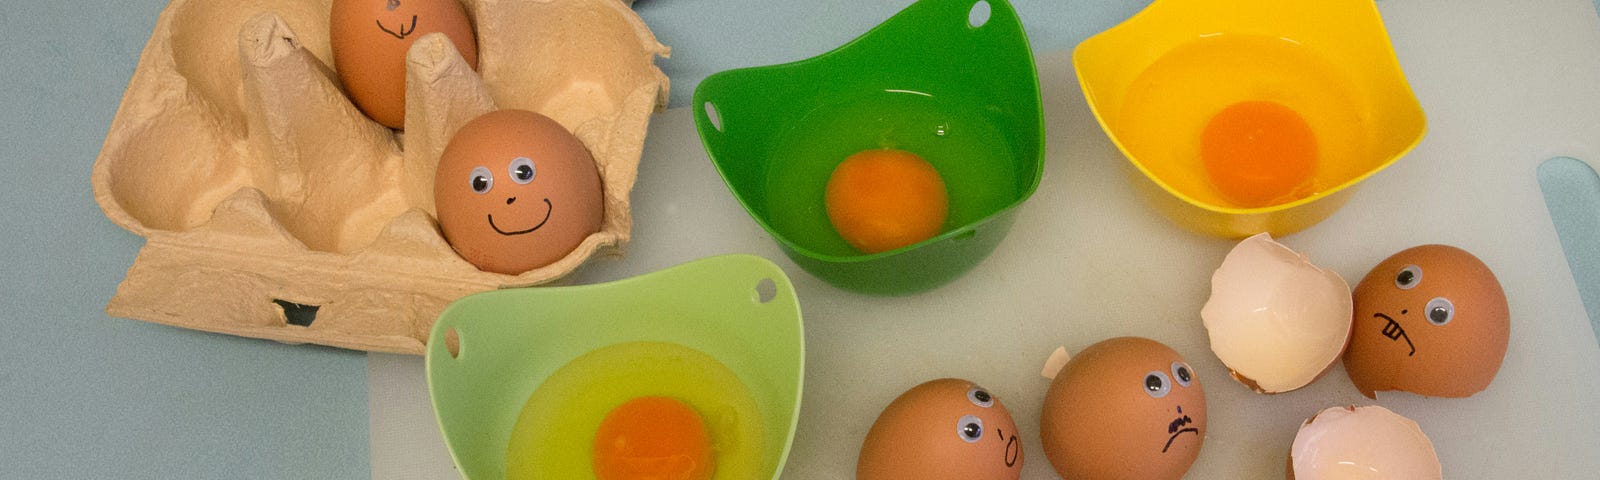 There are 3 colored bowls with eggs. Yellow, dark green, and lime green. Some of the eyes have drawn on happy faces while some look sad.